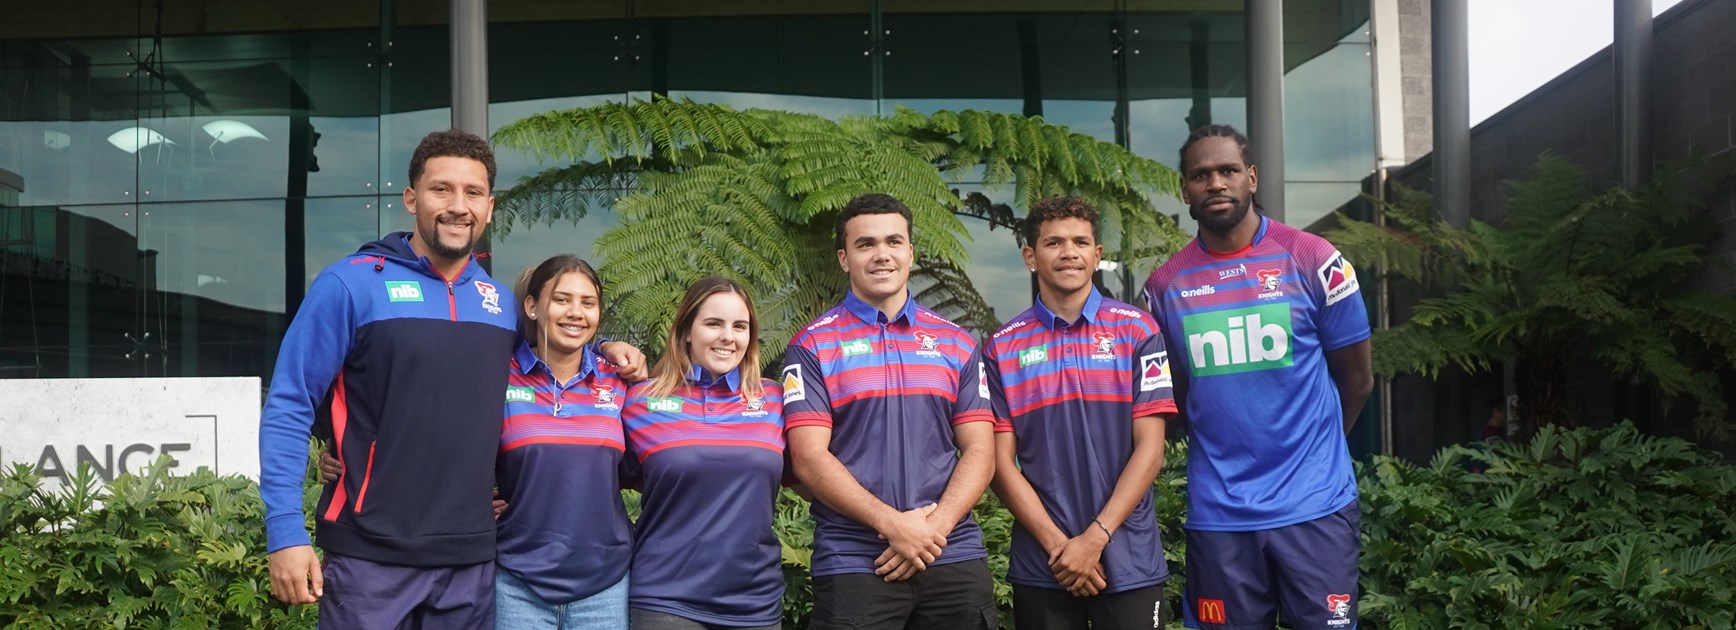 Knights Indigenous Youth Summit representatives confirmed